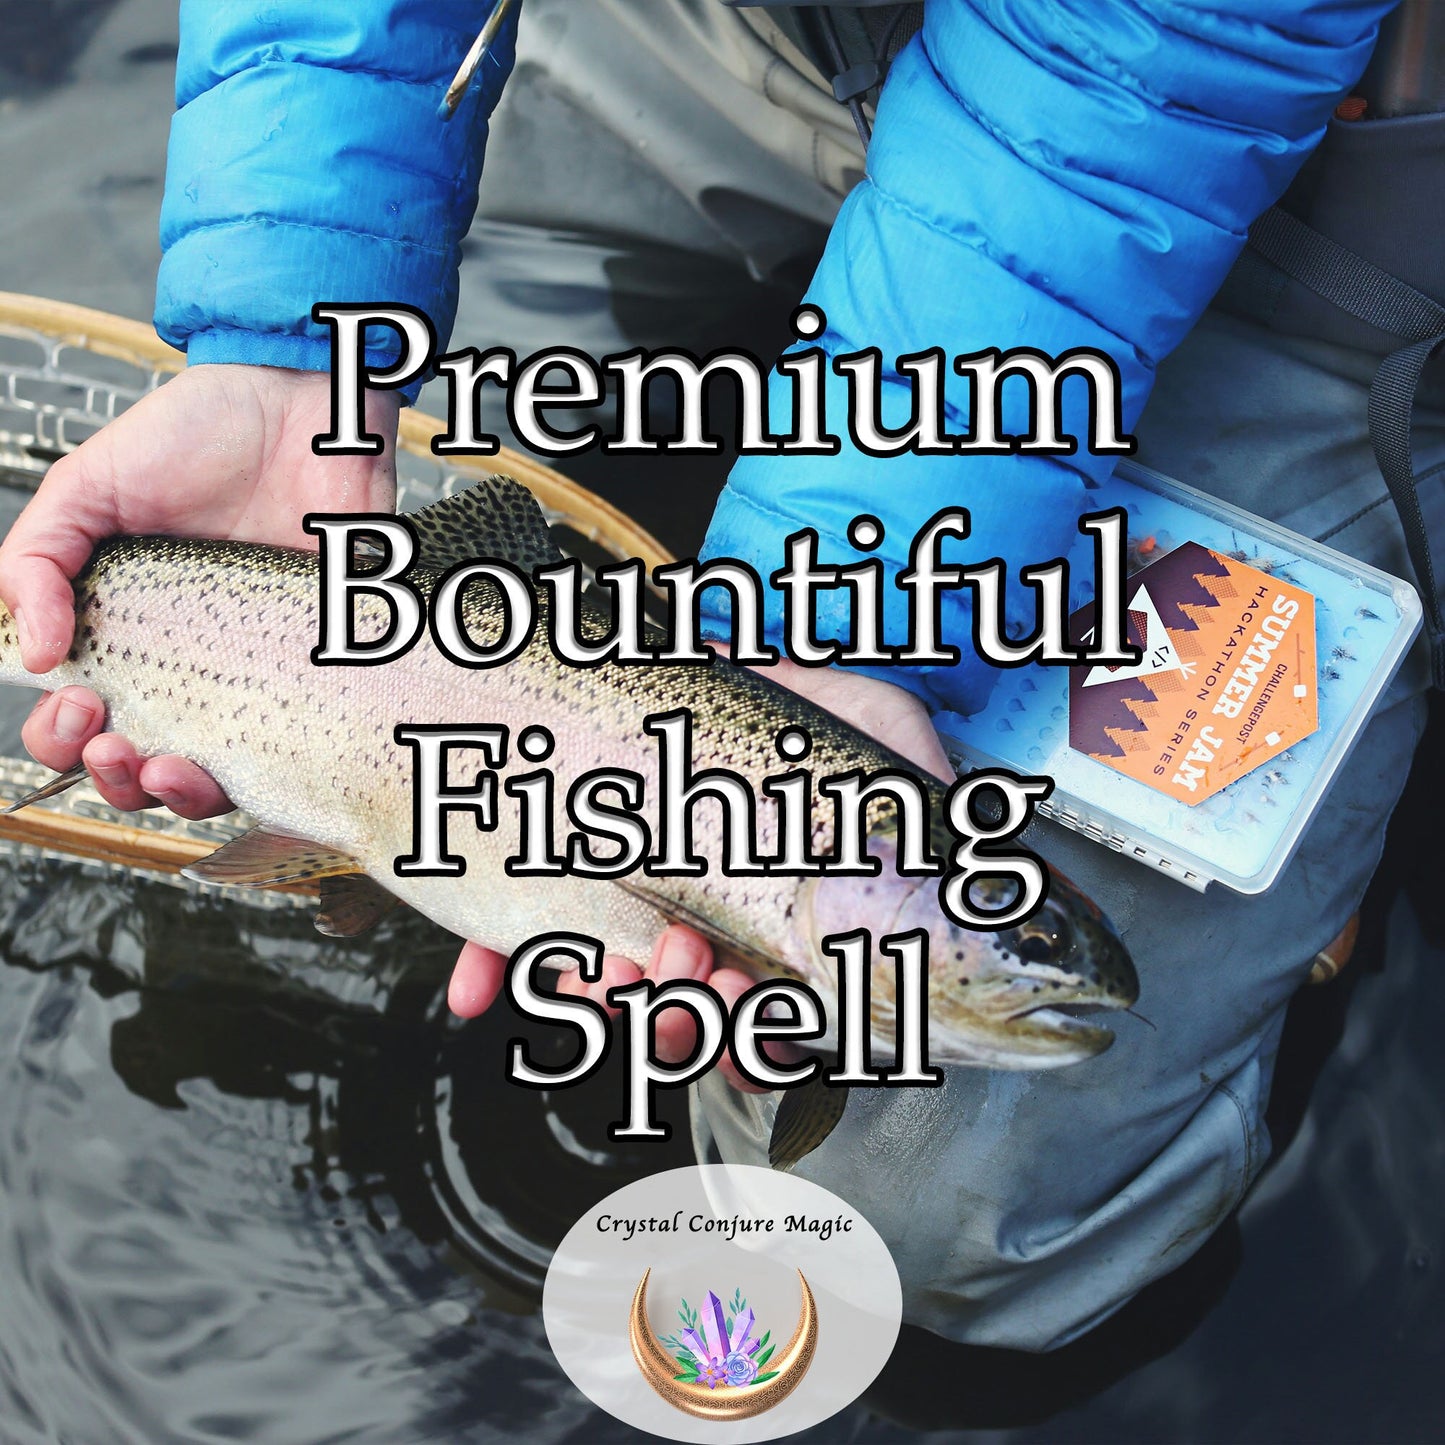 Premium Bountiful Fishing Spell - attract an abundance of fish and cast your line with confidence